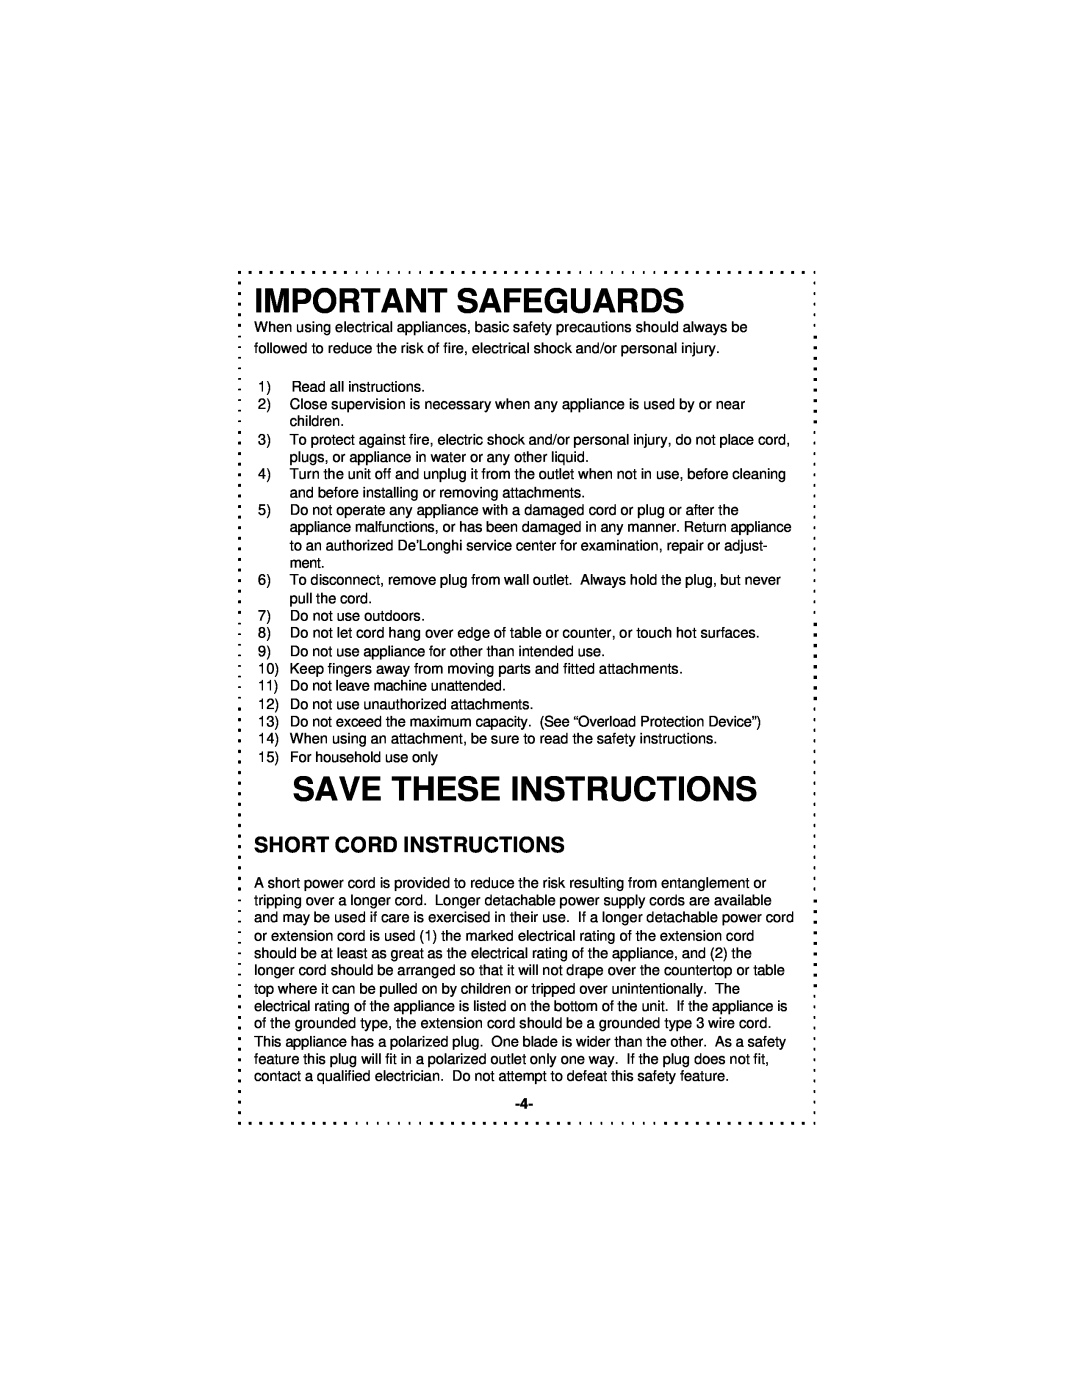 DeLonghi DSM5 - 7 Series instruction manual Important Safeguards, Save These Instructions, Short Cord Instructions 